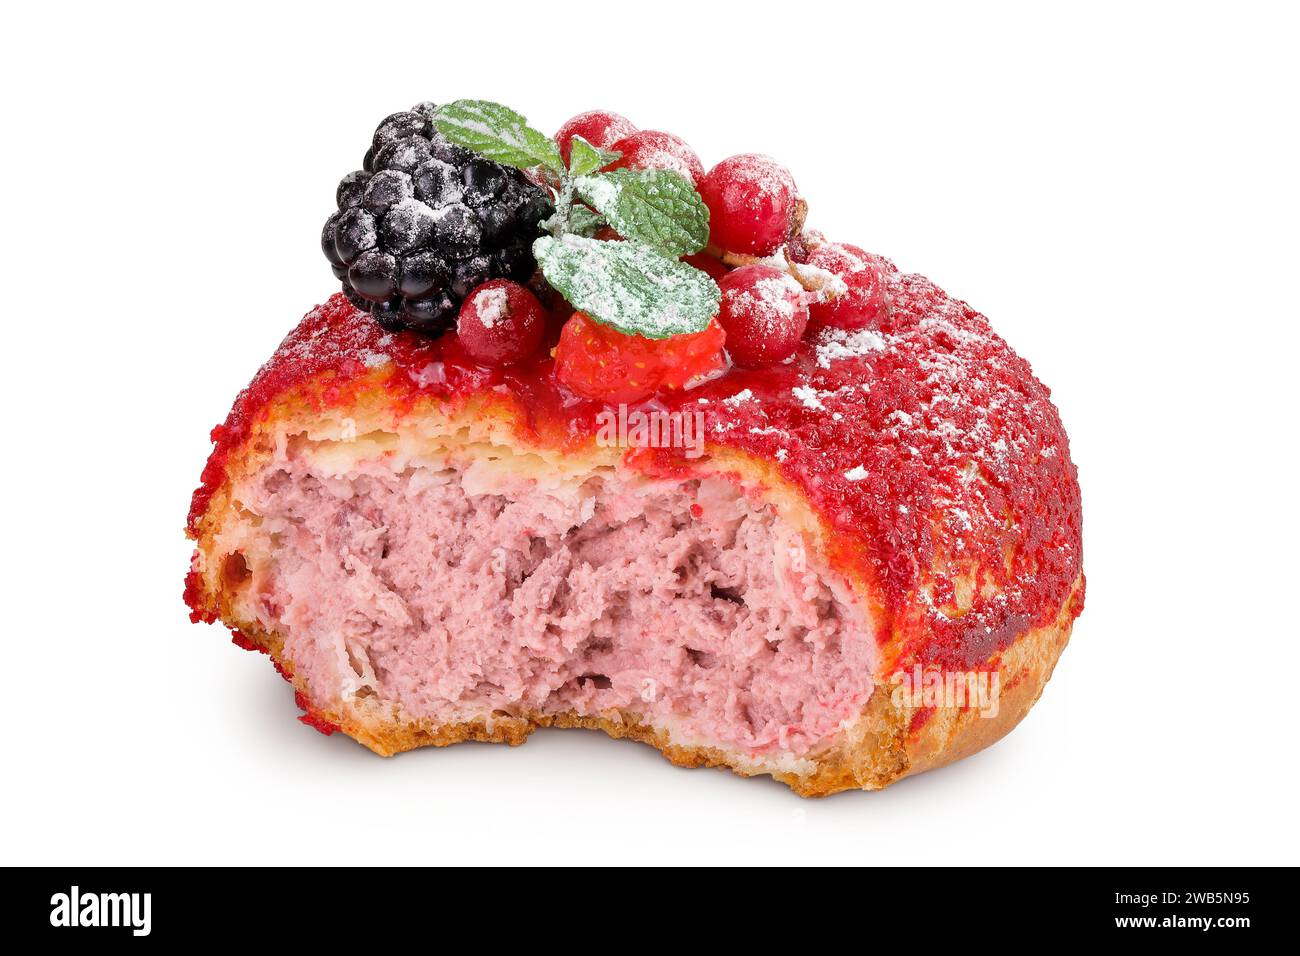 Cake shu eclairs with berries and red crumble isolated on white background Stock Photo